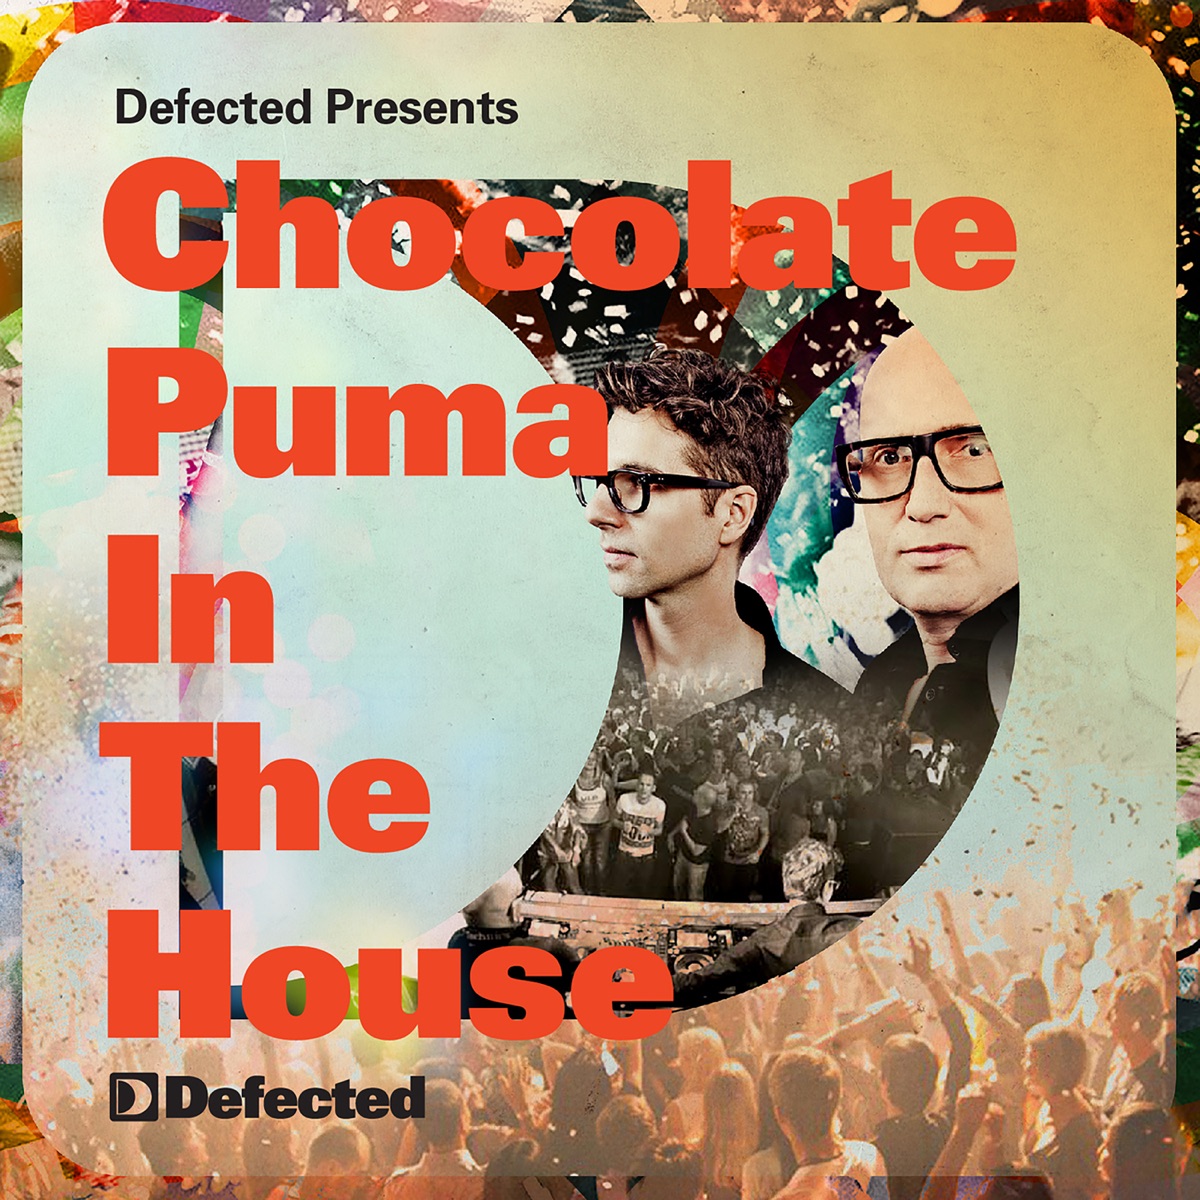 Defected Presents Chocolate Puma In The House (DJ Mix) - Album by Chocolate  Puma - Apple Music